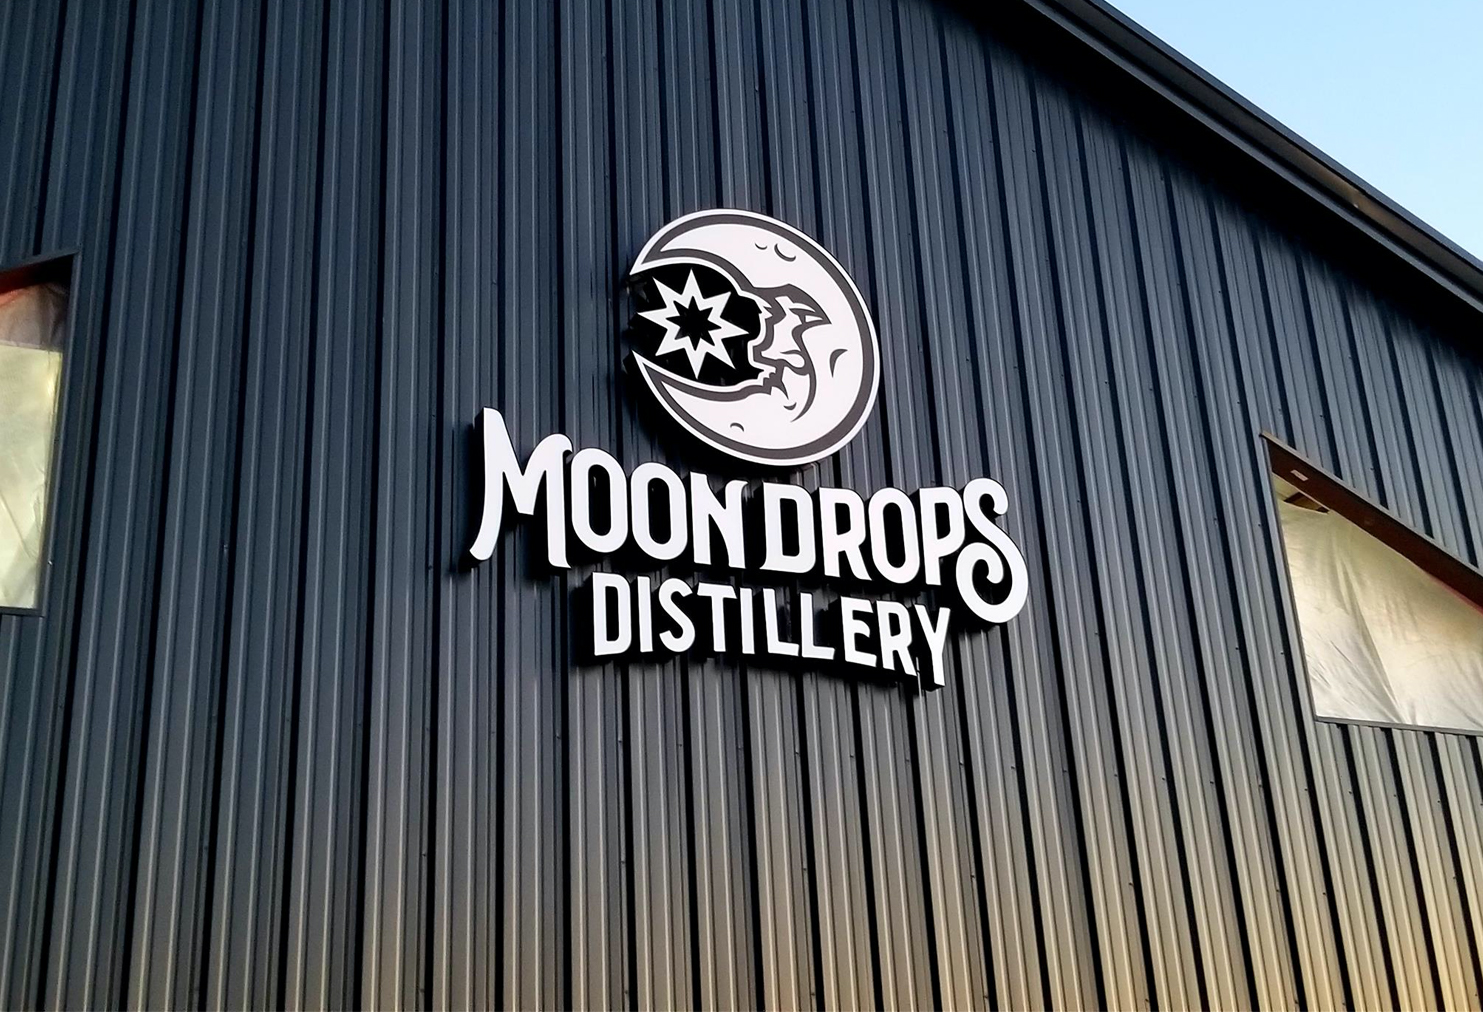 The logo of the Moon Drops Distillery company on the wall of the building